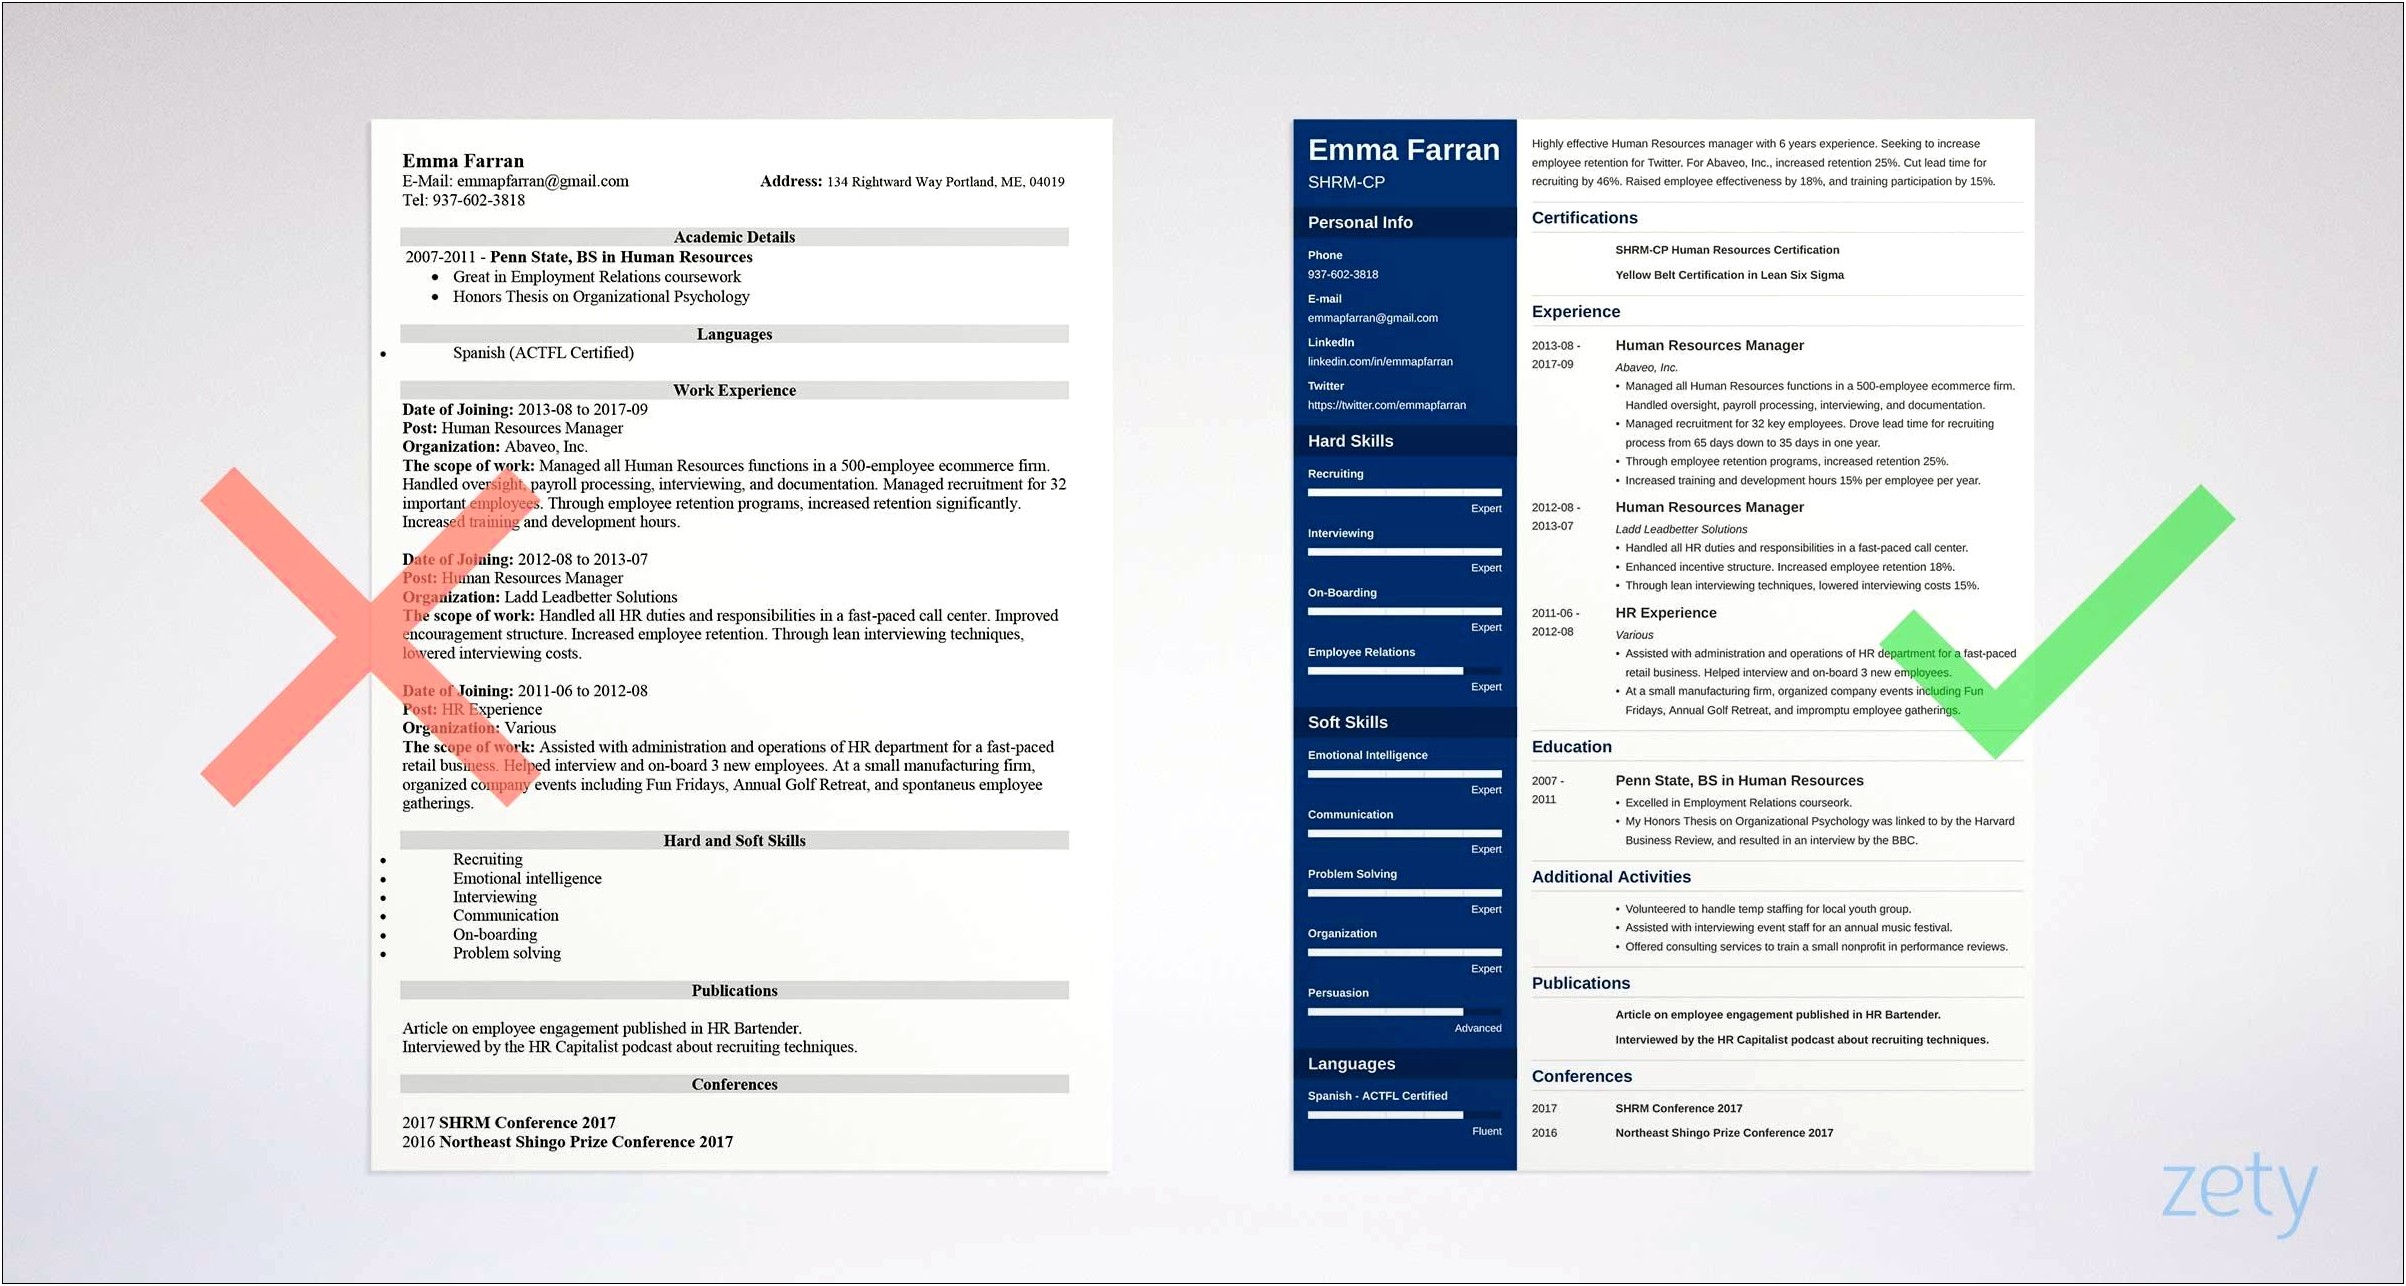 Psu Career Services Business Resume Example